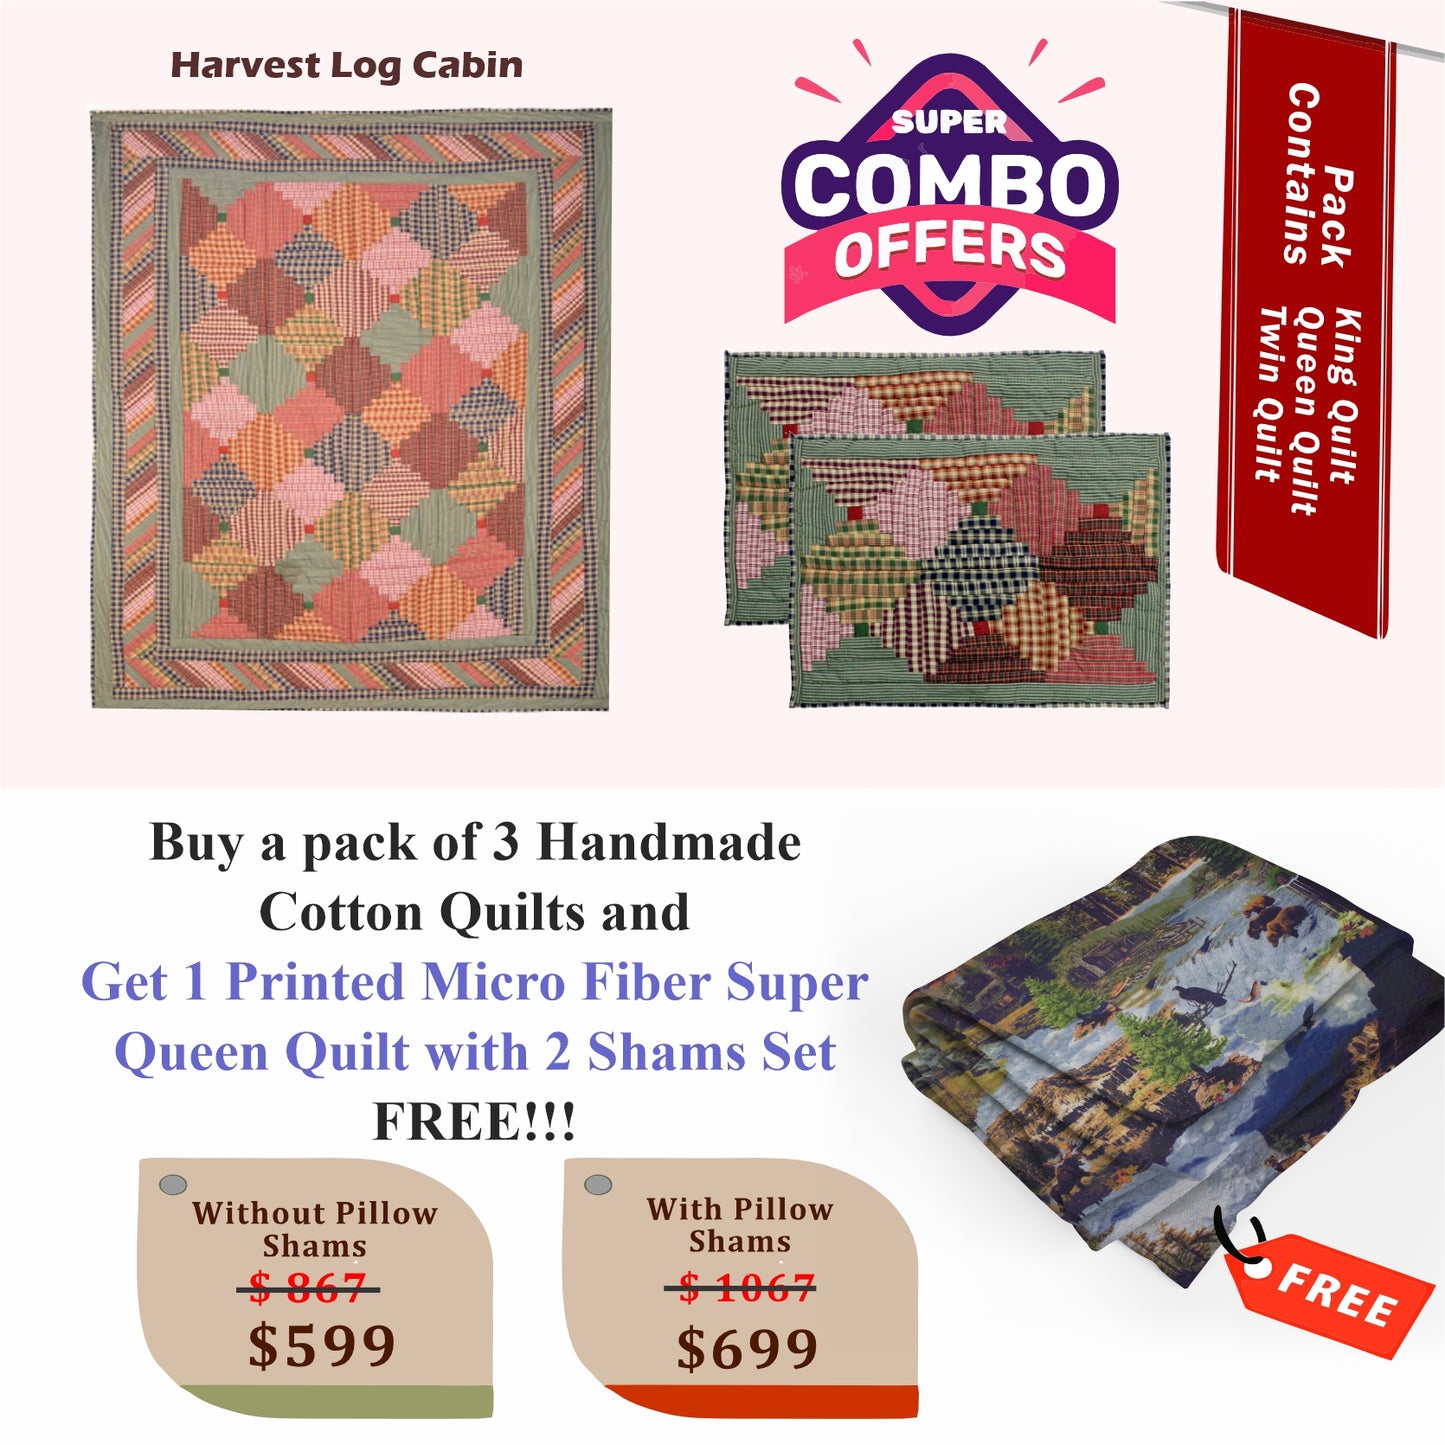 Harvest Log Cabin - Handmade Cotton quilts | Matching pillow shams | Buy 3 cotton quilts and get 1 Printed Microfiber Super Queen Quilt with 2 Shams set FREE